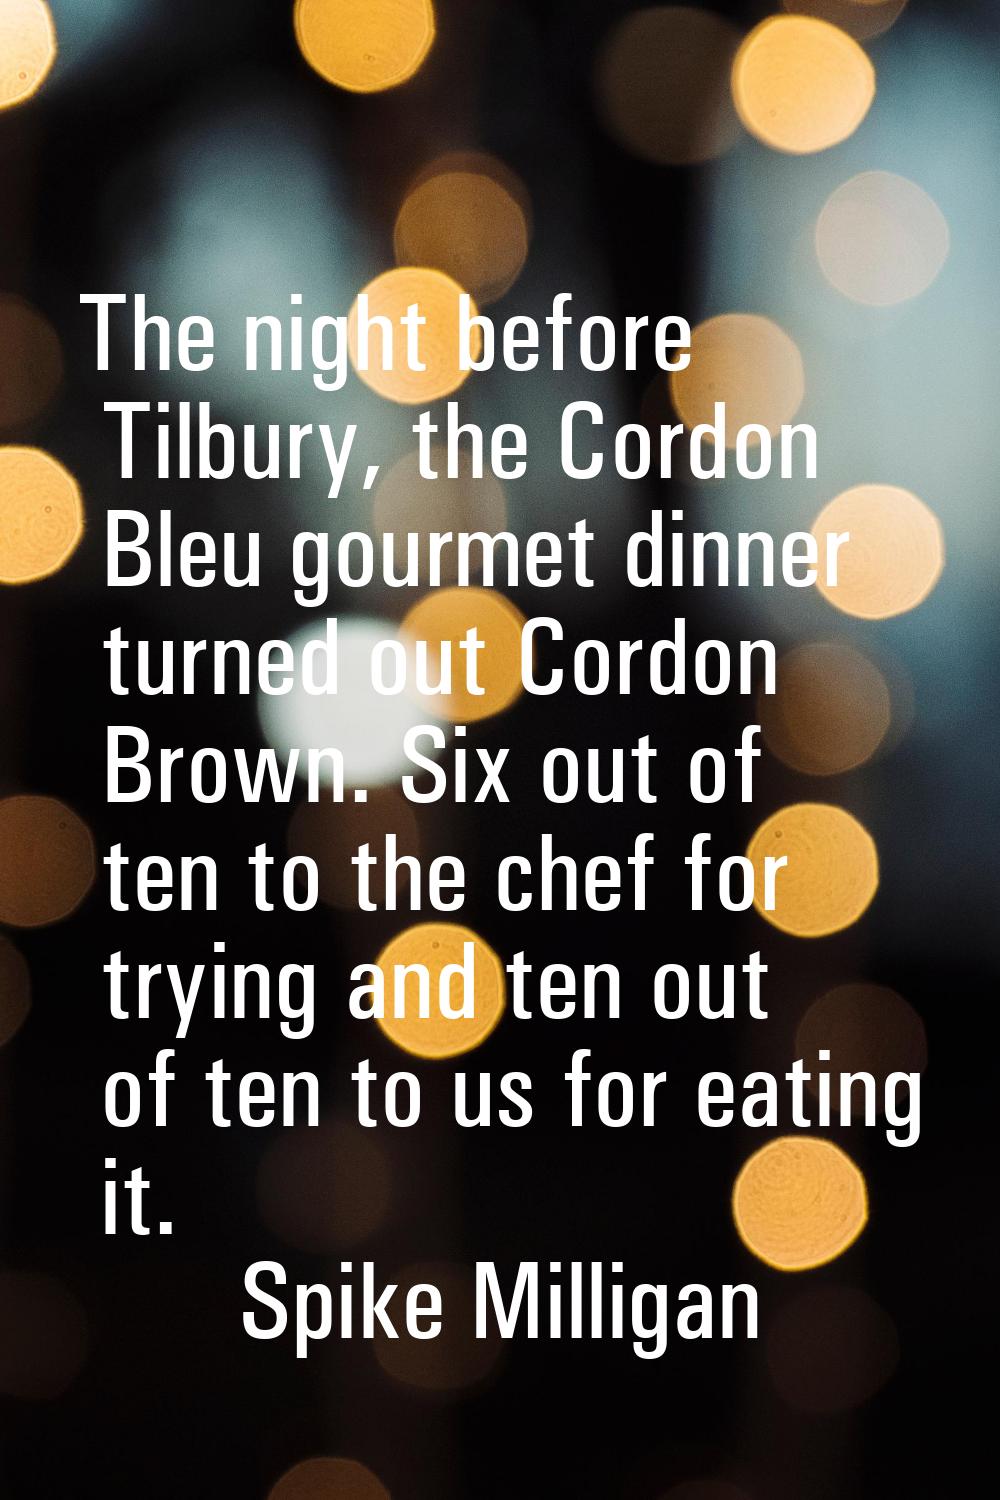 The night before Tilbury, the Cordon Bleu gourmet dinner turned out Cordon Brown. Six out of ten to